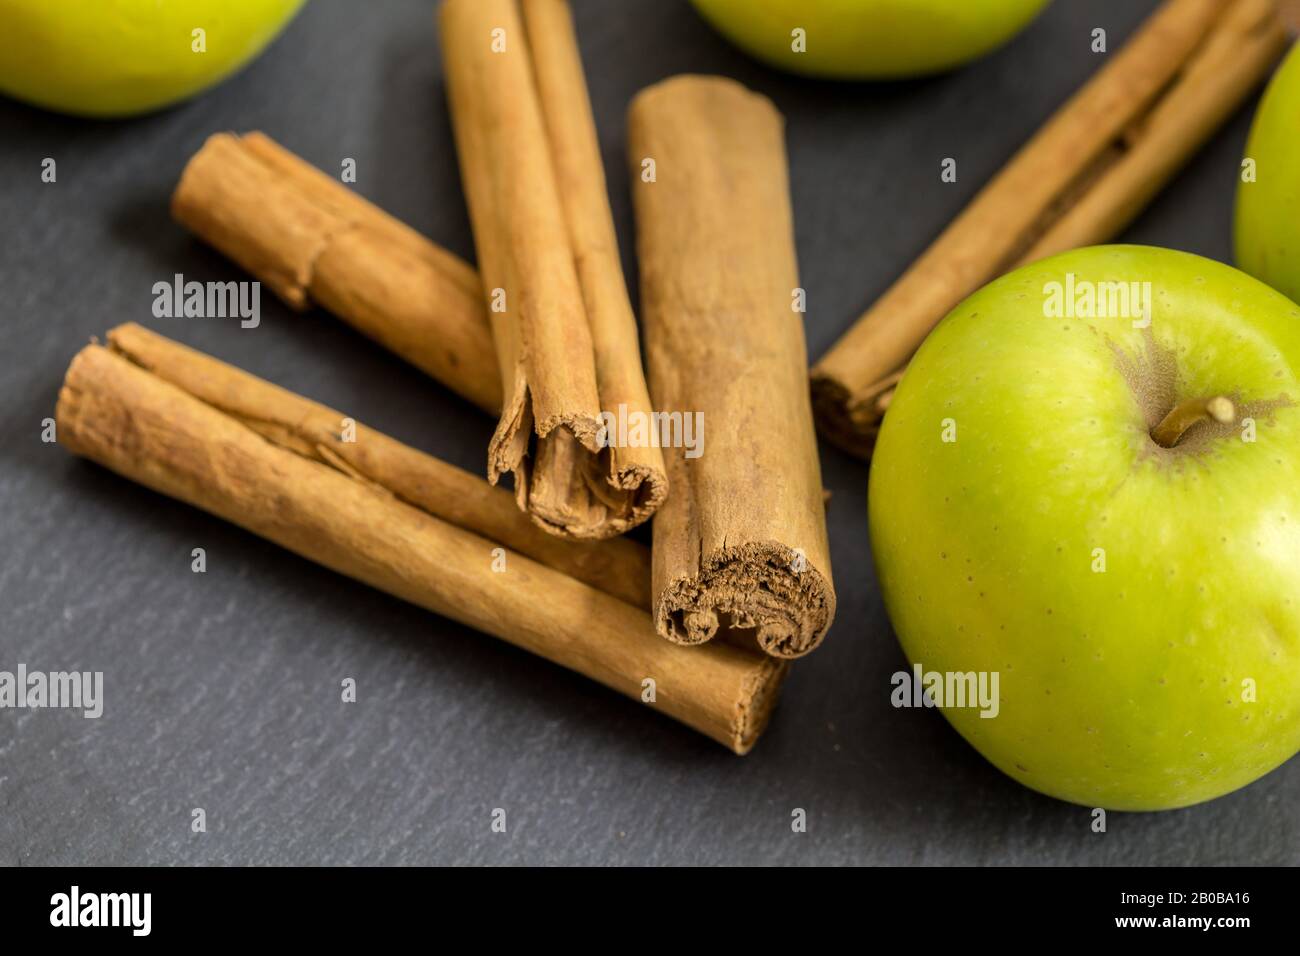 Cinnamon sticks and green apples isolated on black slate background with selective focus - close up horizontal image Stock Photo